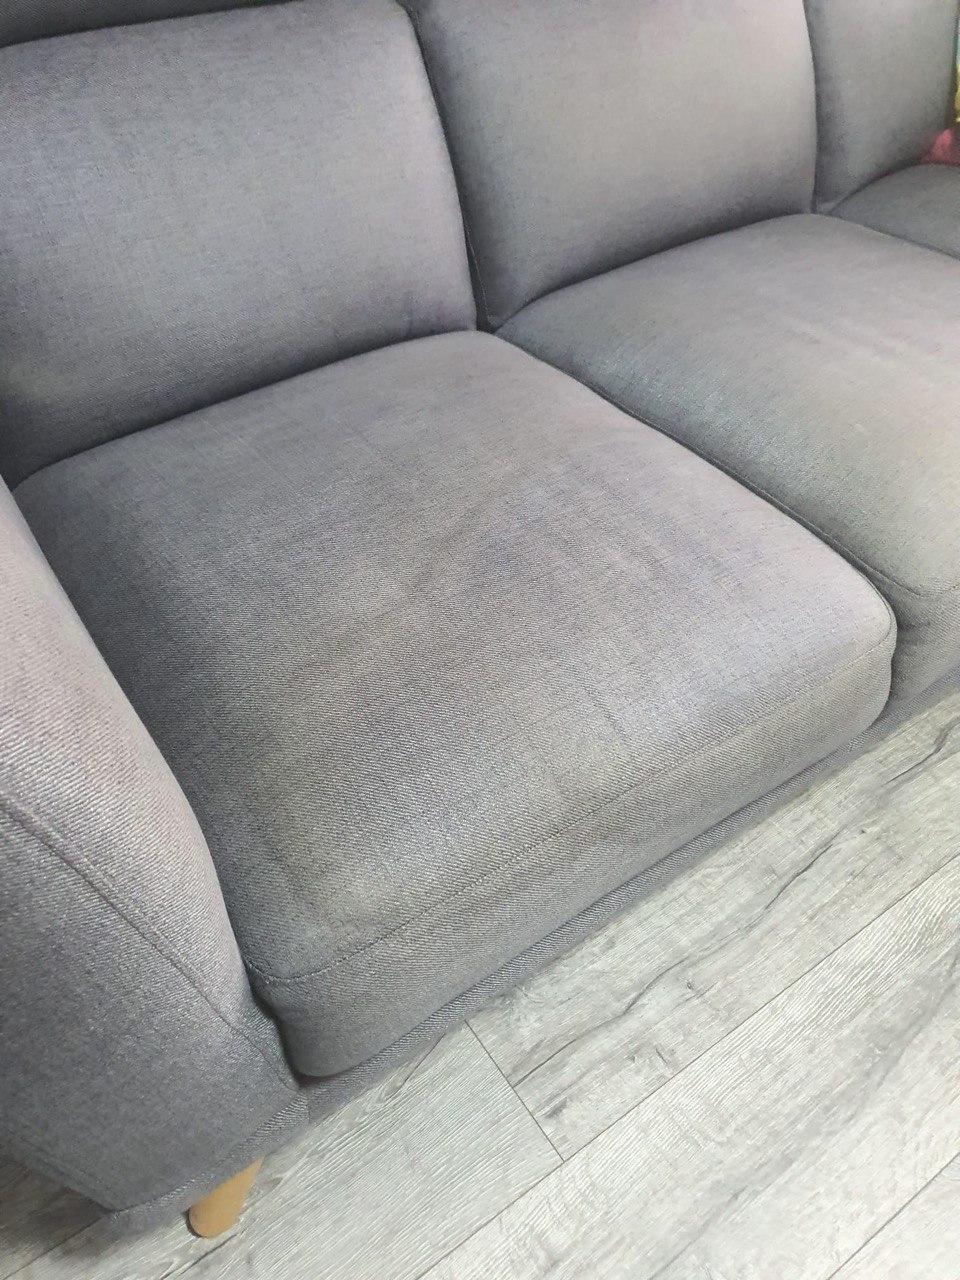 Grey sofa with stain on it